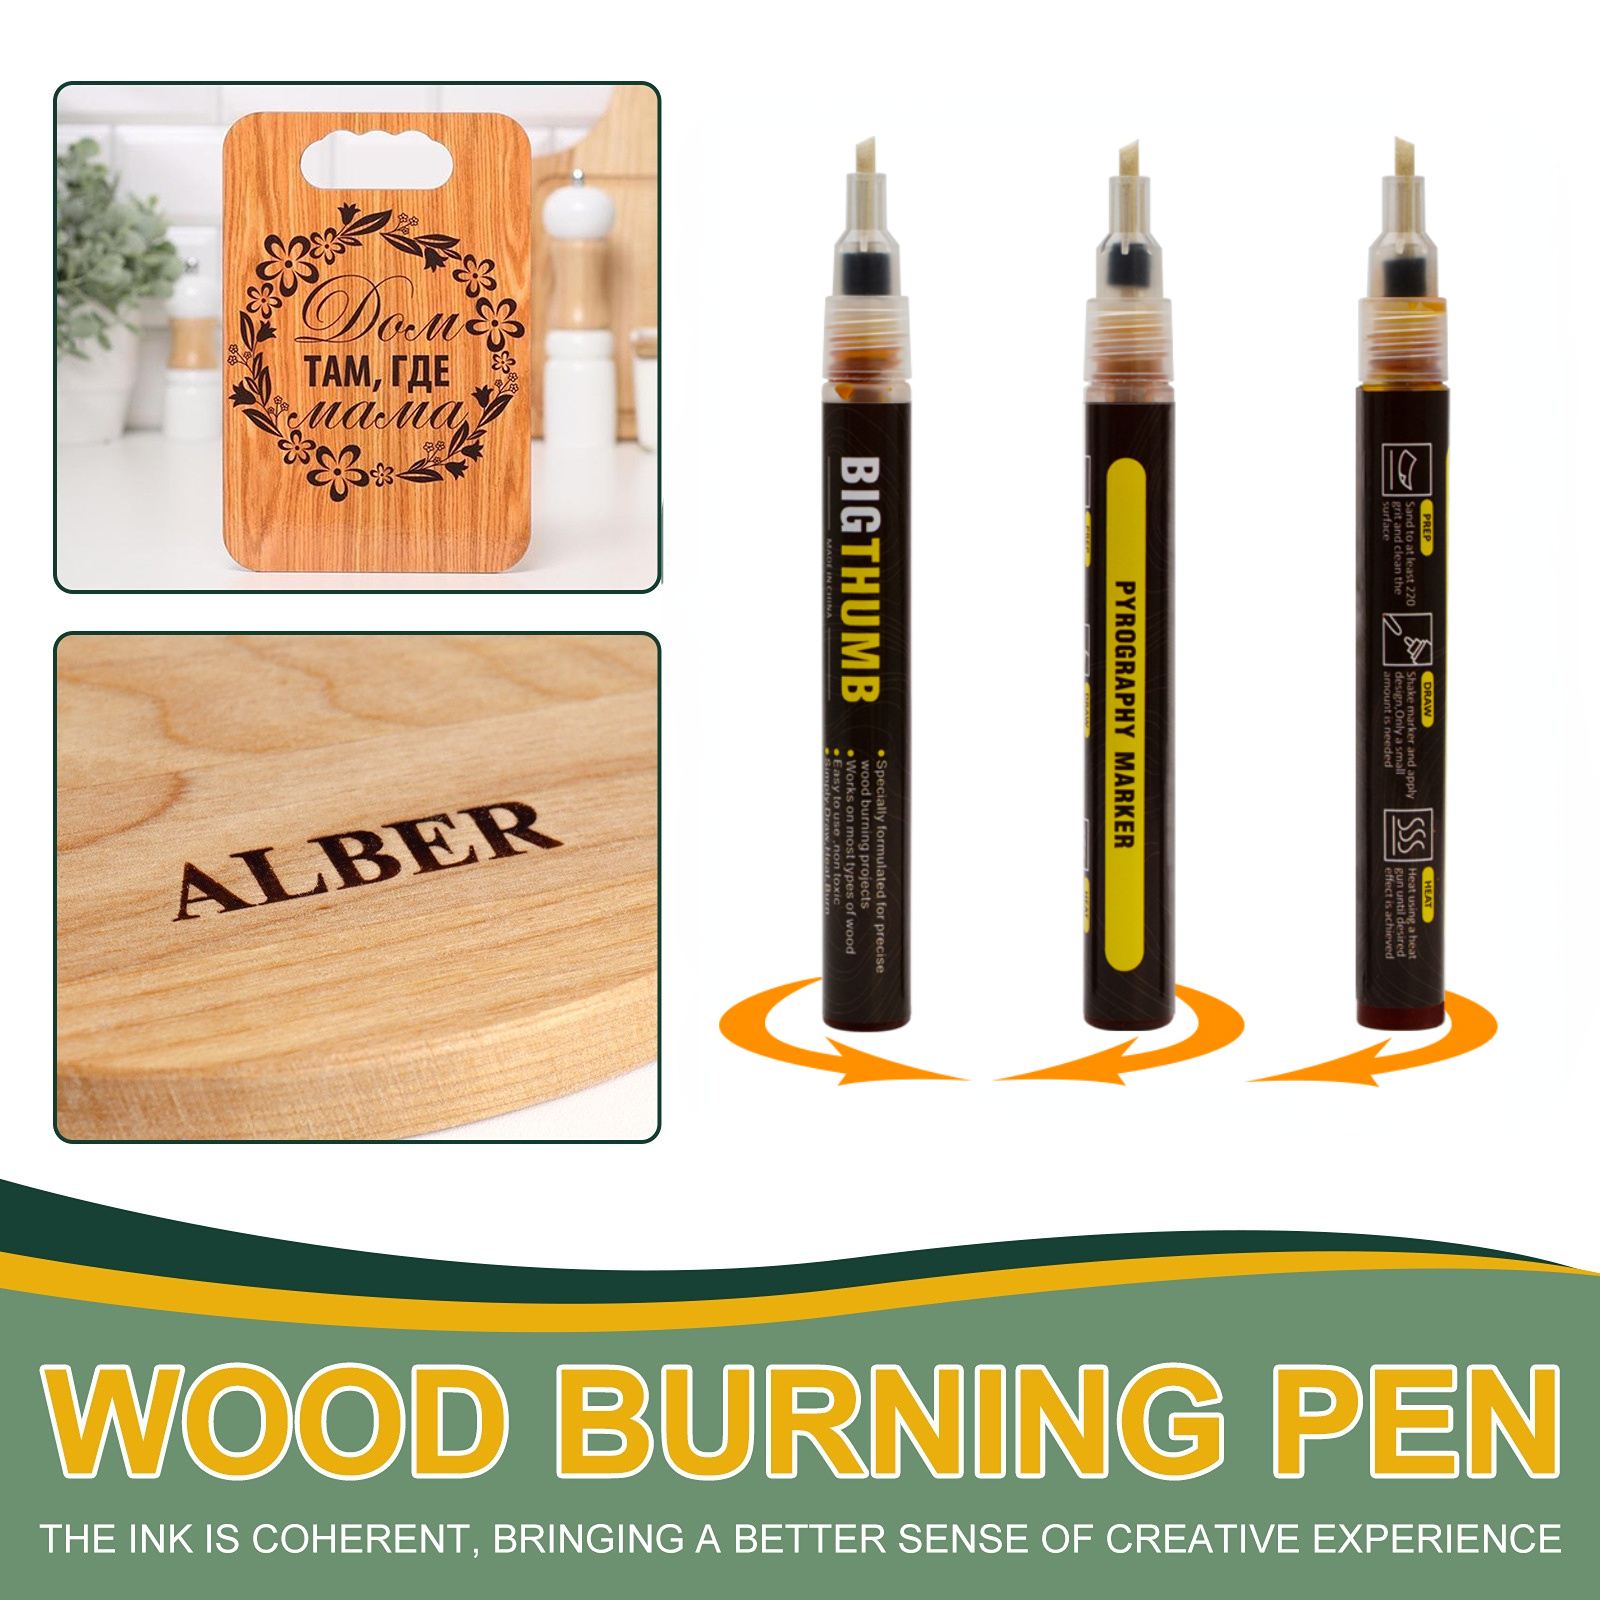 Wood Burning Pen Marker Oily Ink Scorch Markers For Wood 3 Pcs Wood Burning  Kit Craft Supplies DIY Pyrography Pen For Birch - AliExpress